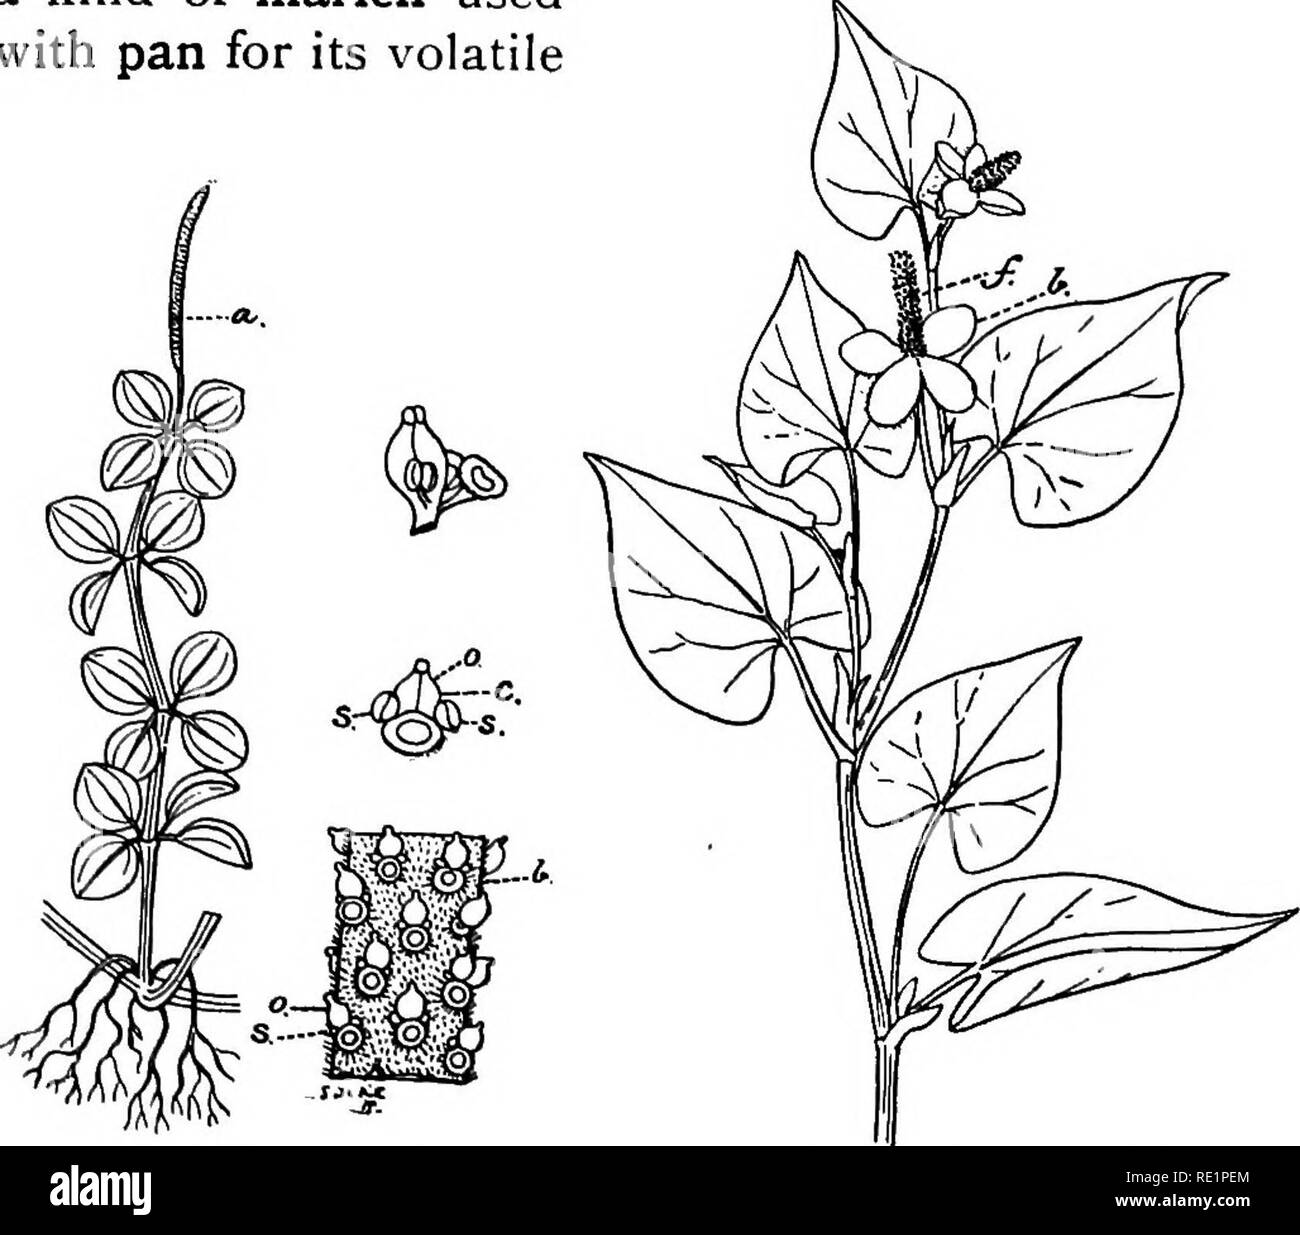 . A manual of Indian botany. Botany. INCOMPLETE 275 ticatory; chai {Piper Chaba), also a stout climber, the wood of which is used as a pungent condiment; pipool or Long Pepper {Piper longum), a slender creeper; gol-marich or Black F&amp;^pev {Piper nigrum), also a climber; kabab-chini is Piper caninum of Java, a kind of marich used with pan for its volatile. Fig. 247,—Peferonua reflexa Fig. 248.—Hoiiiiu}&lt;nia cordata , Spike, i. Spike enlarged, r, One y, Spike with a whorl of four white bracts flower, o. Ovary, i, Stamen. (i) at its base. oil (fig. 246). Peperomia reflexa (fig. 247) is a com Stock Photo